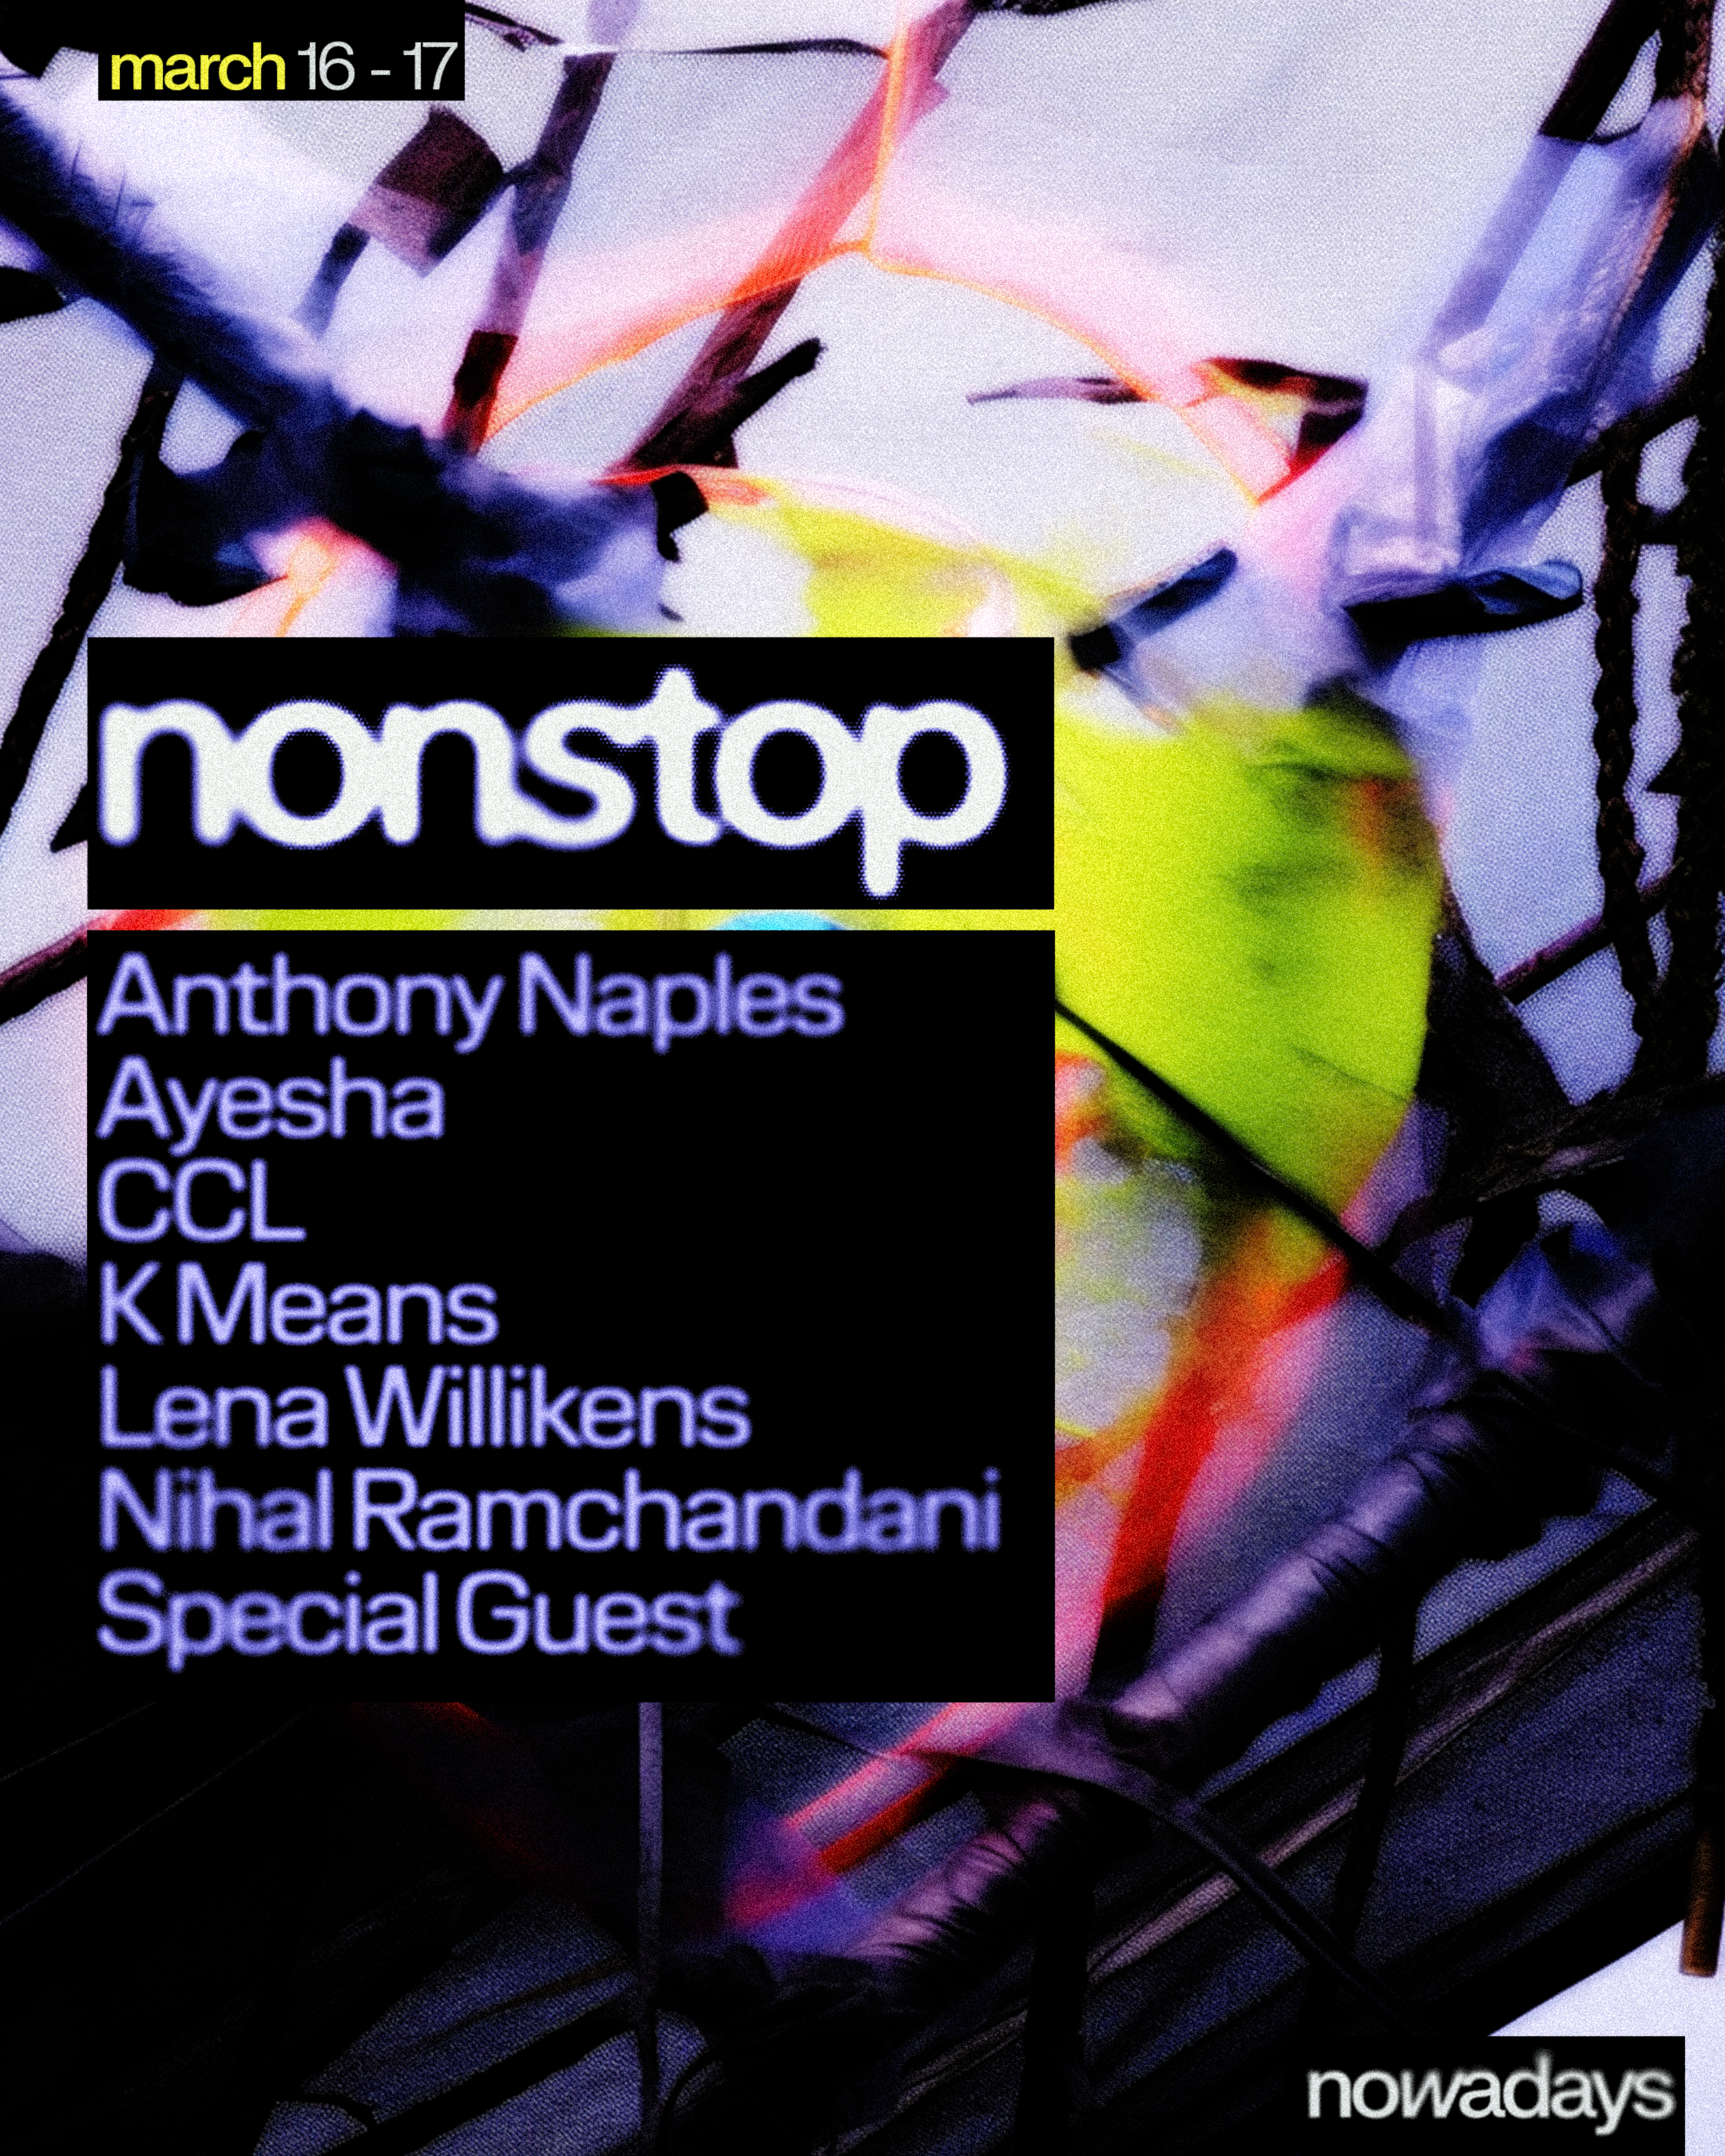 Nonstop: Anthony Naples, Ayesha, CCL, k means, Lena Willikens, Nihal Ramchandani, Special Guest - フライヤー表